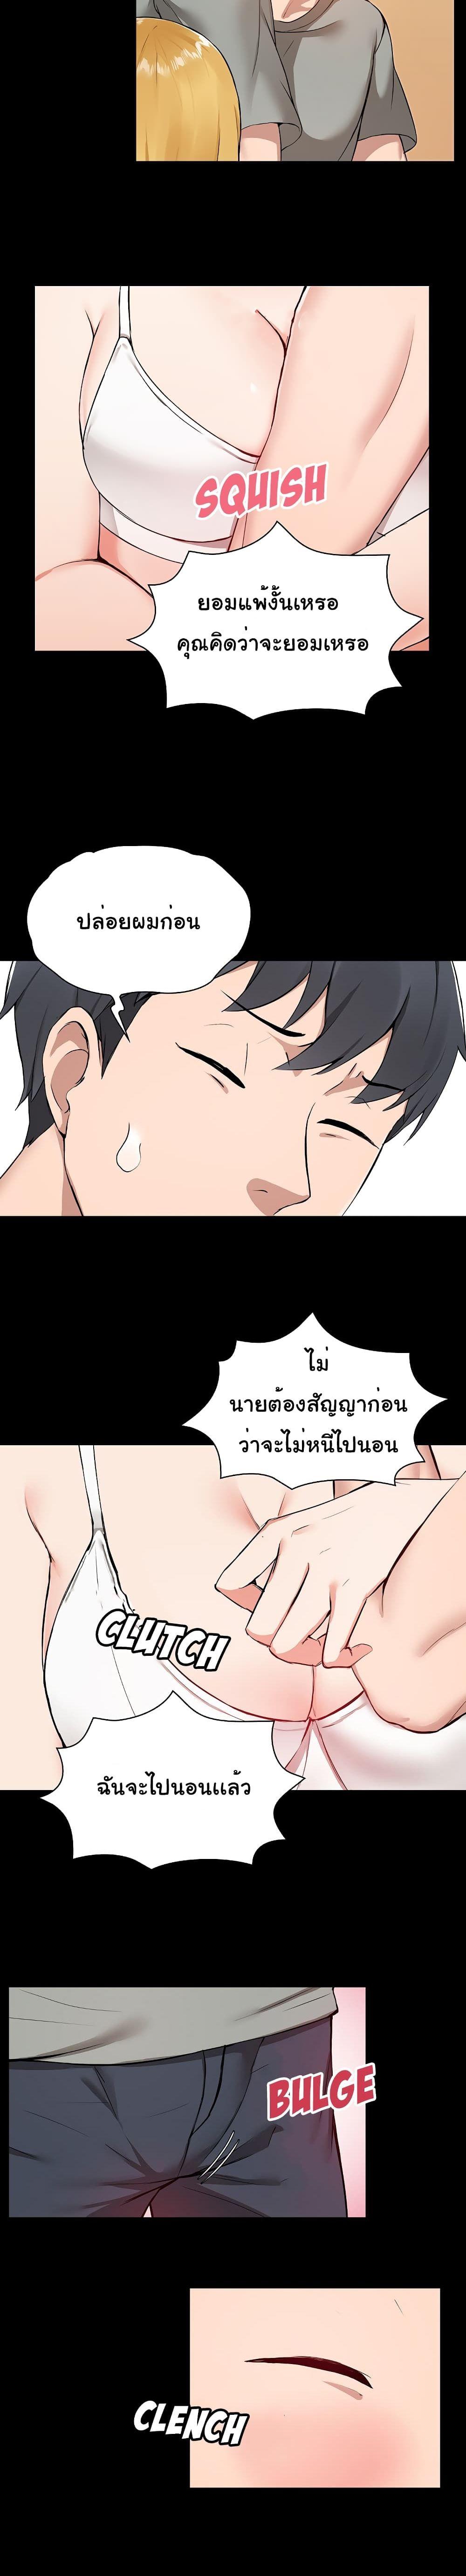 All About That Game Life 1 ภาพ 20